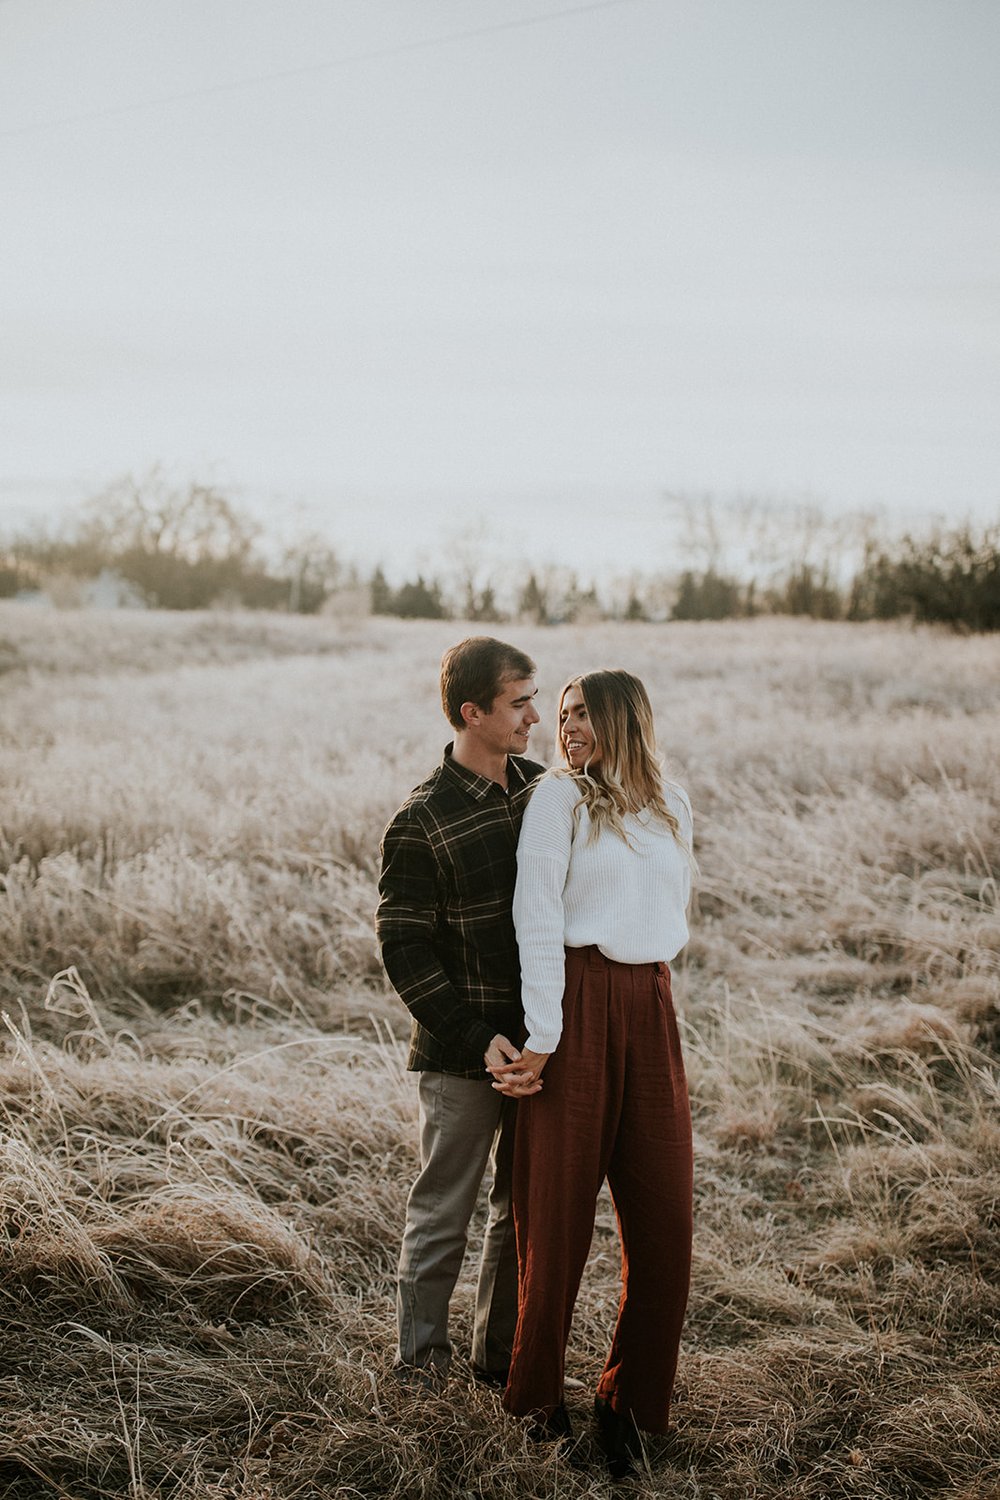  Couple in a field for engagement photos, an example of what to wear that includes neutral colors and seasonally appropriate outfits. 